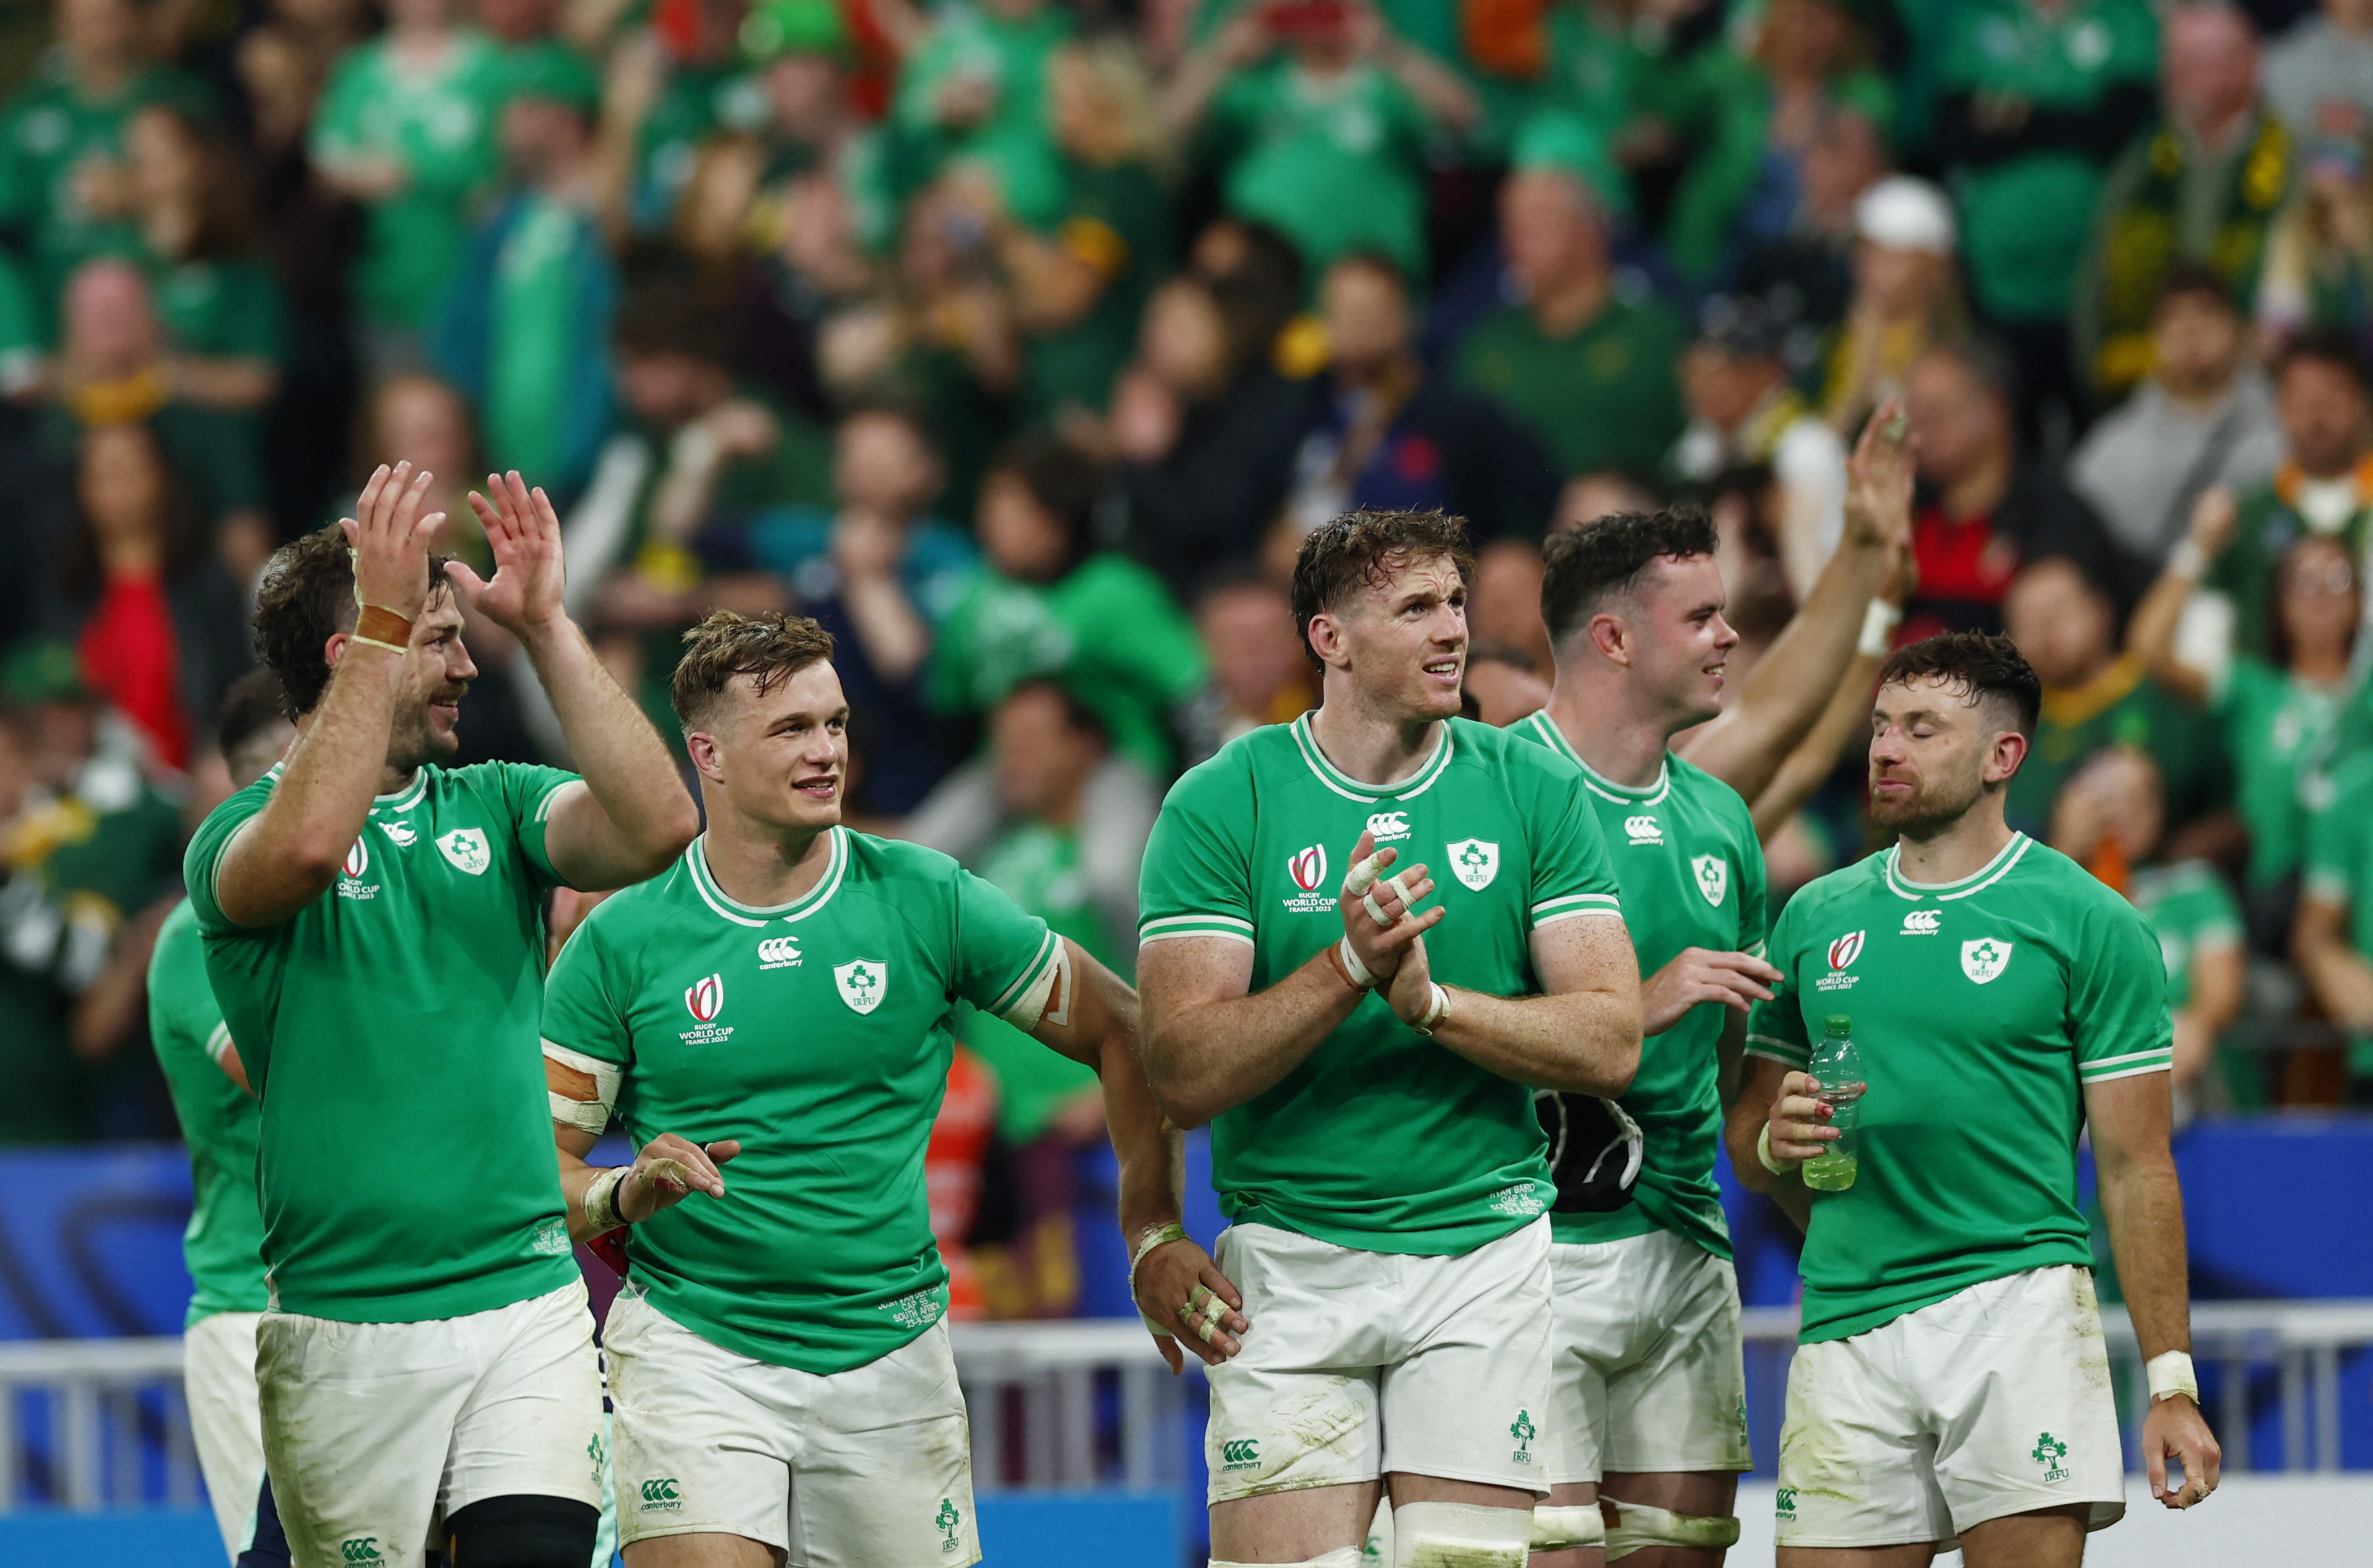 Biggest Irish TV audience of the year tuned in for win over South Africa Reuters